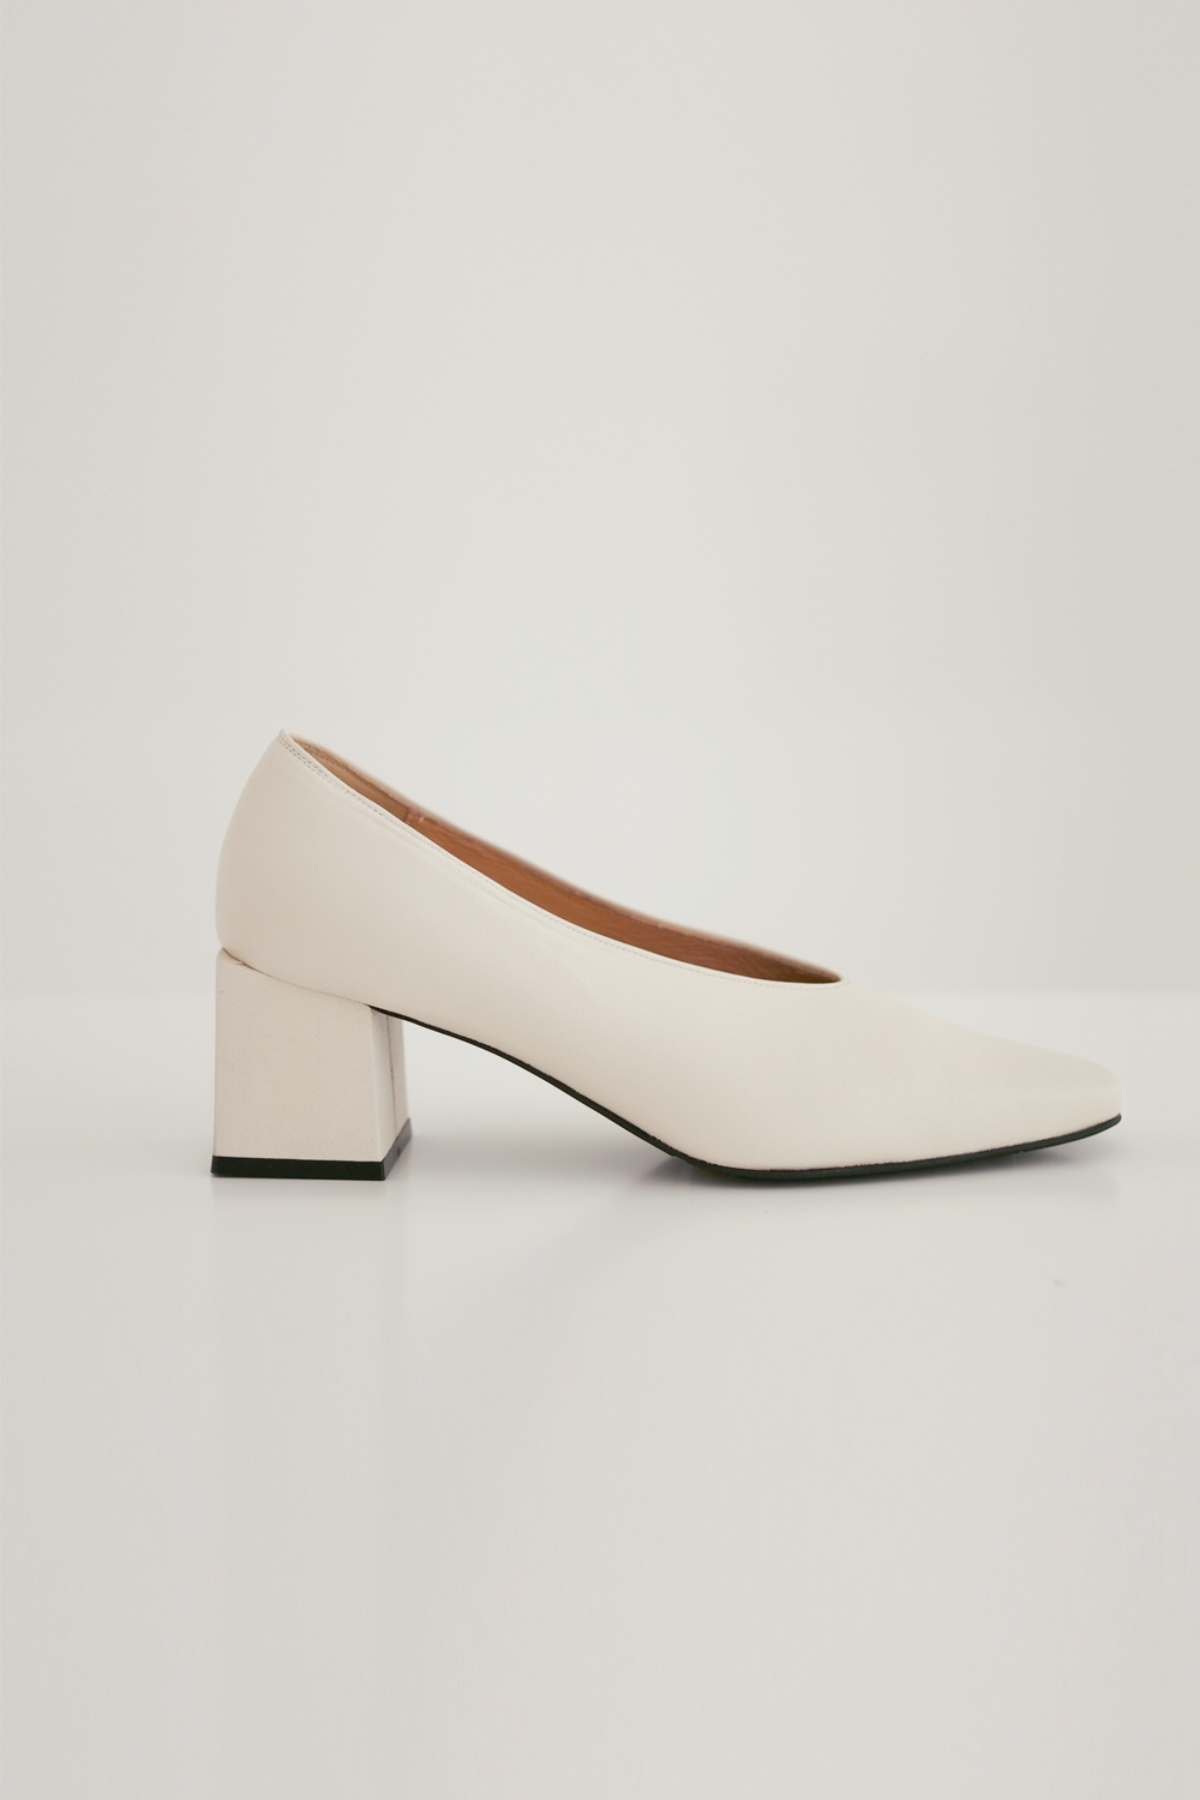 ANTHÈSE venica square middle heel, ivory (40%)당일발송